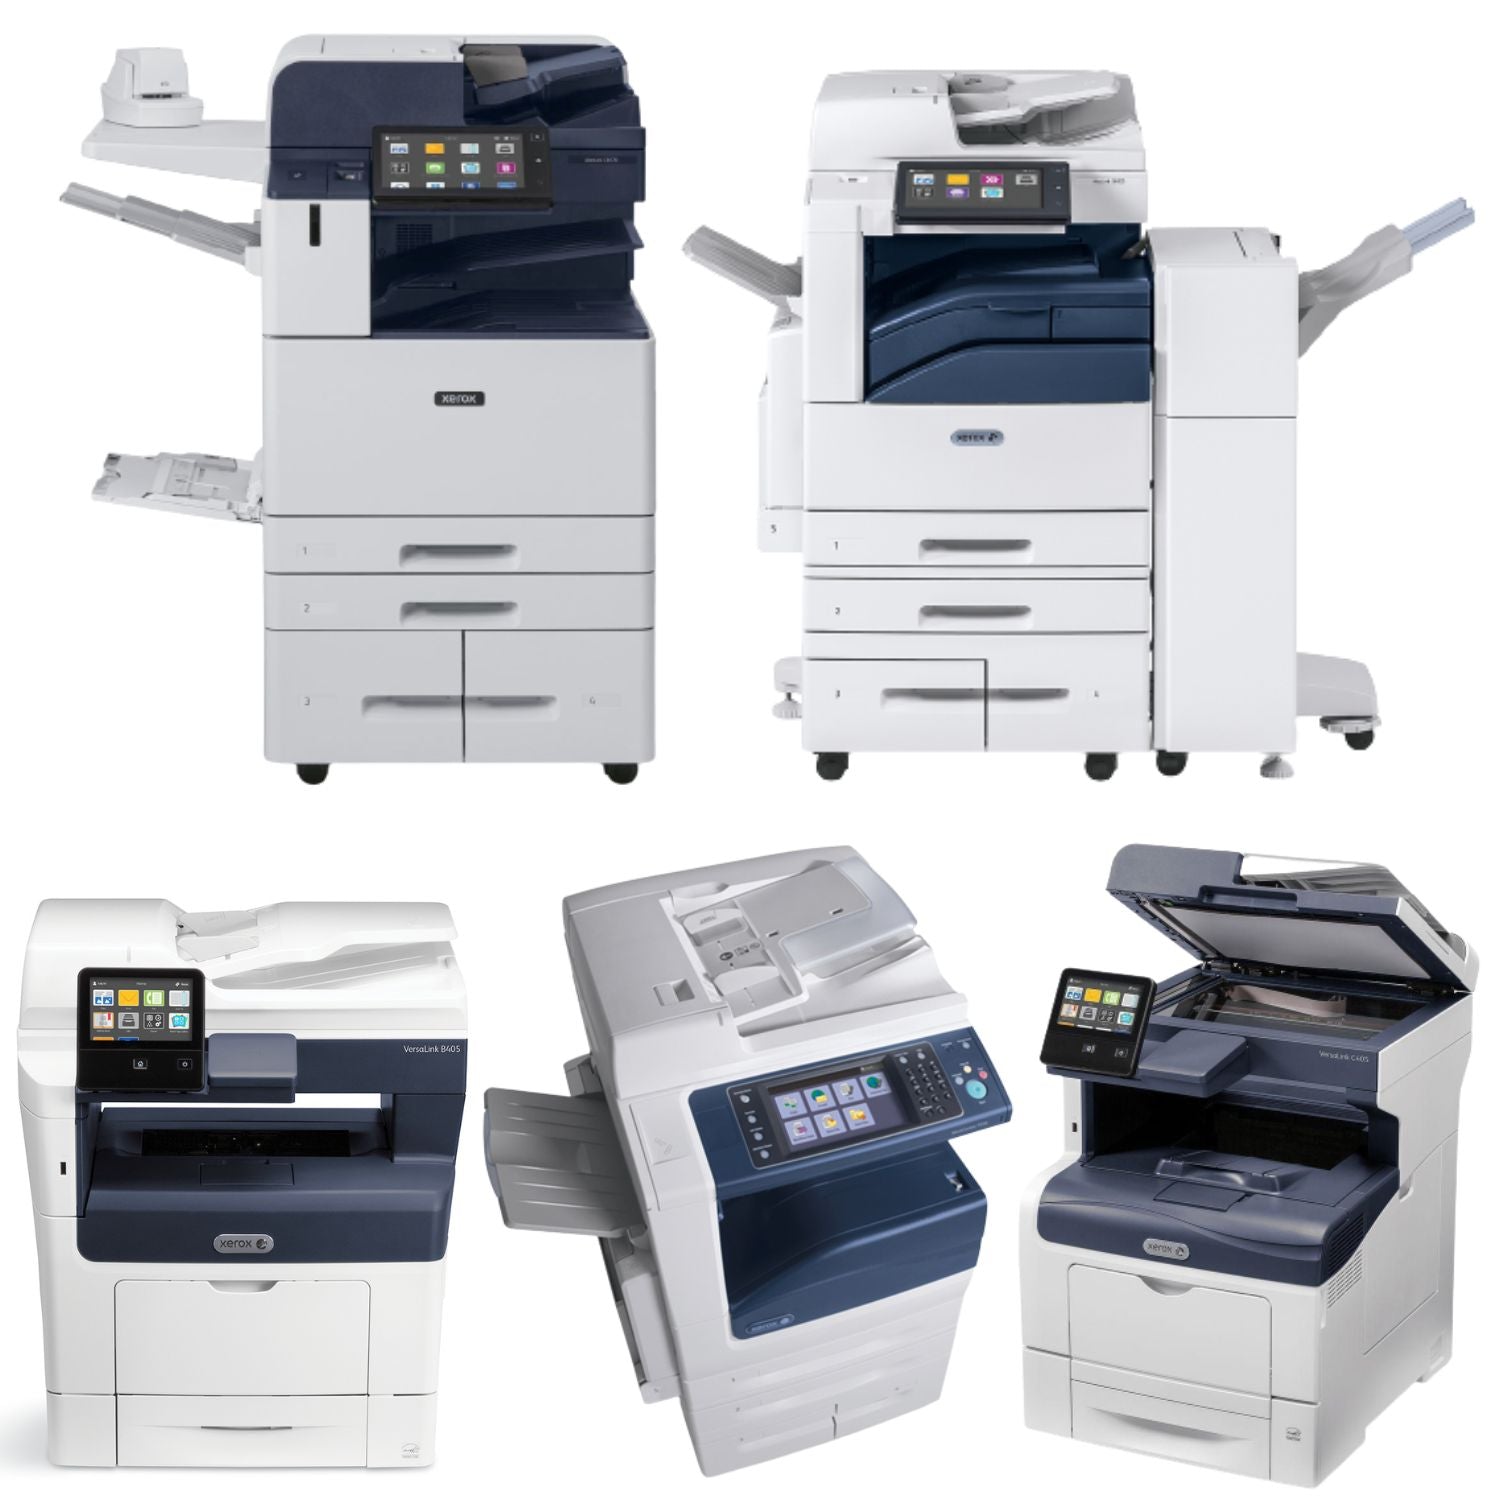 The Top 5 Xerox Copiers Tailored for Law Firms' Needs